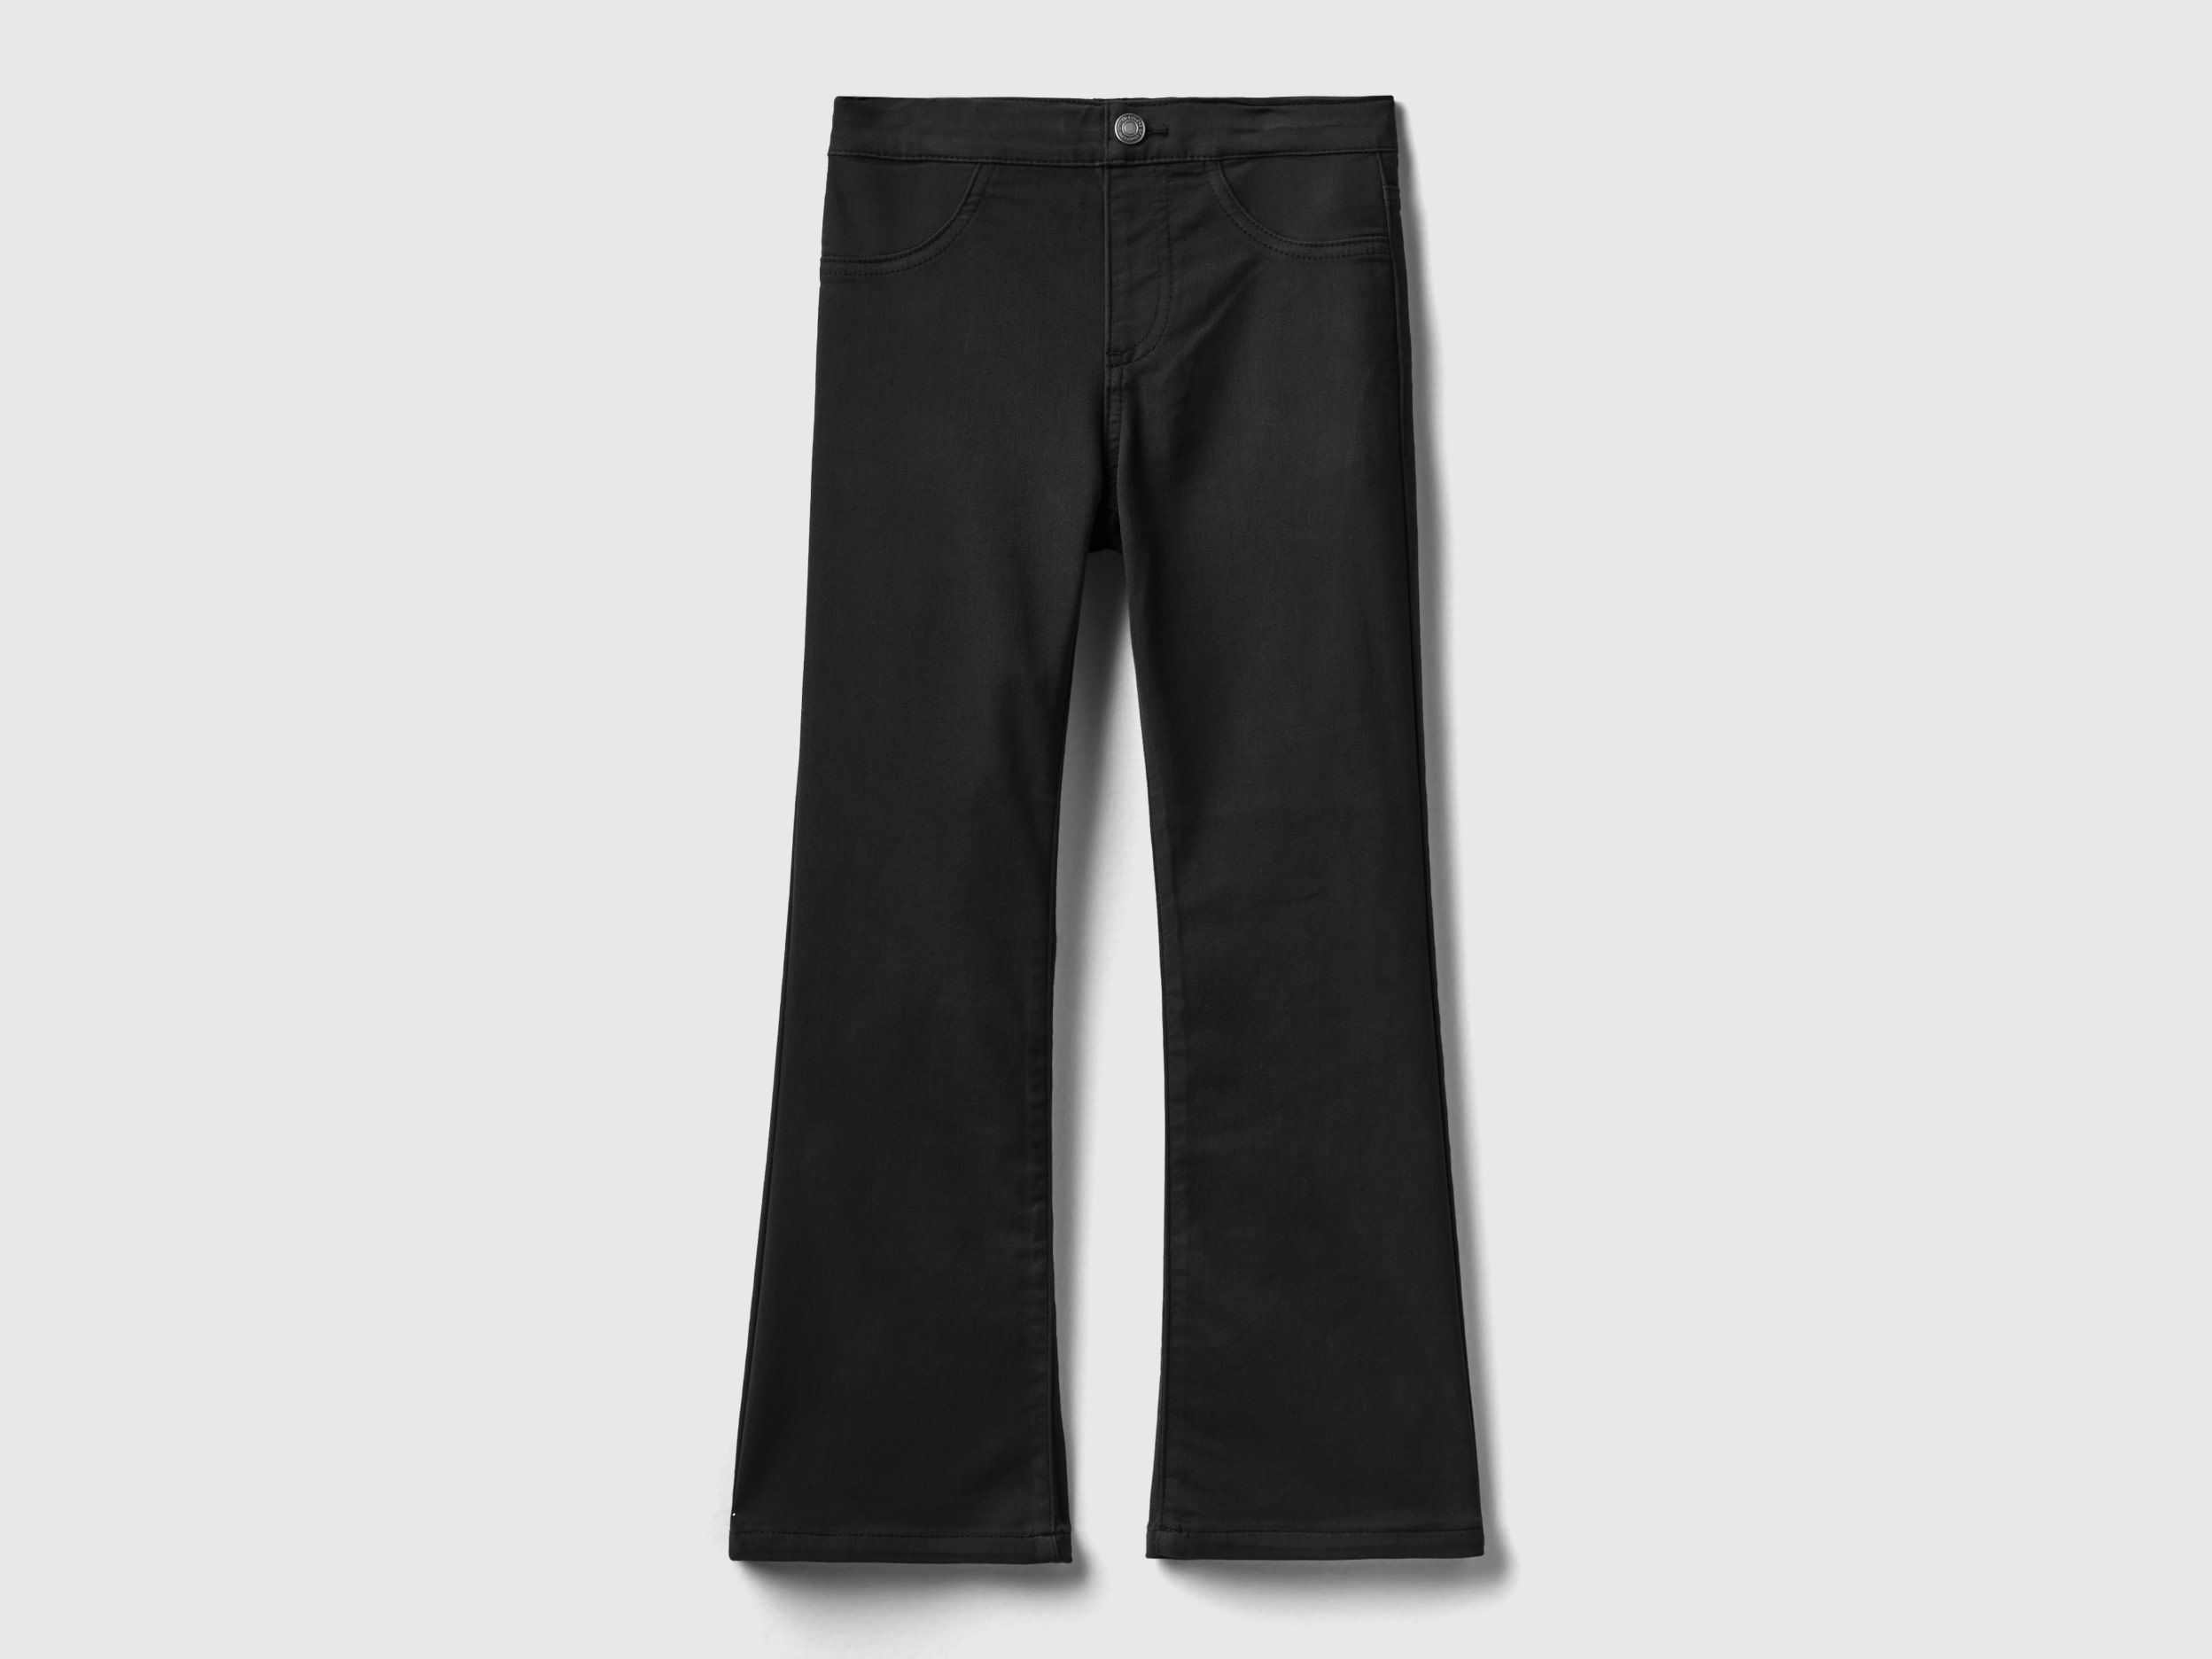 Benetton, Flared Stretch Trousers, size XL, Black, Kids